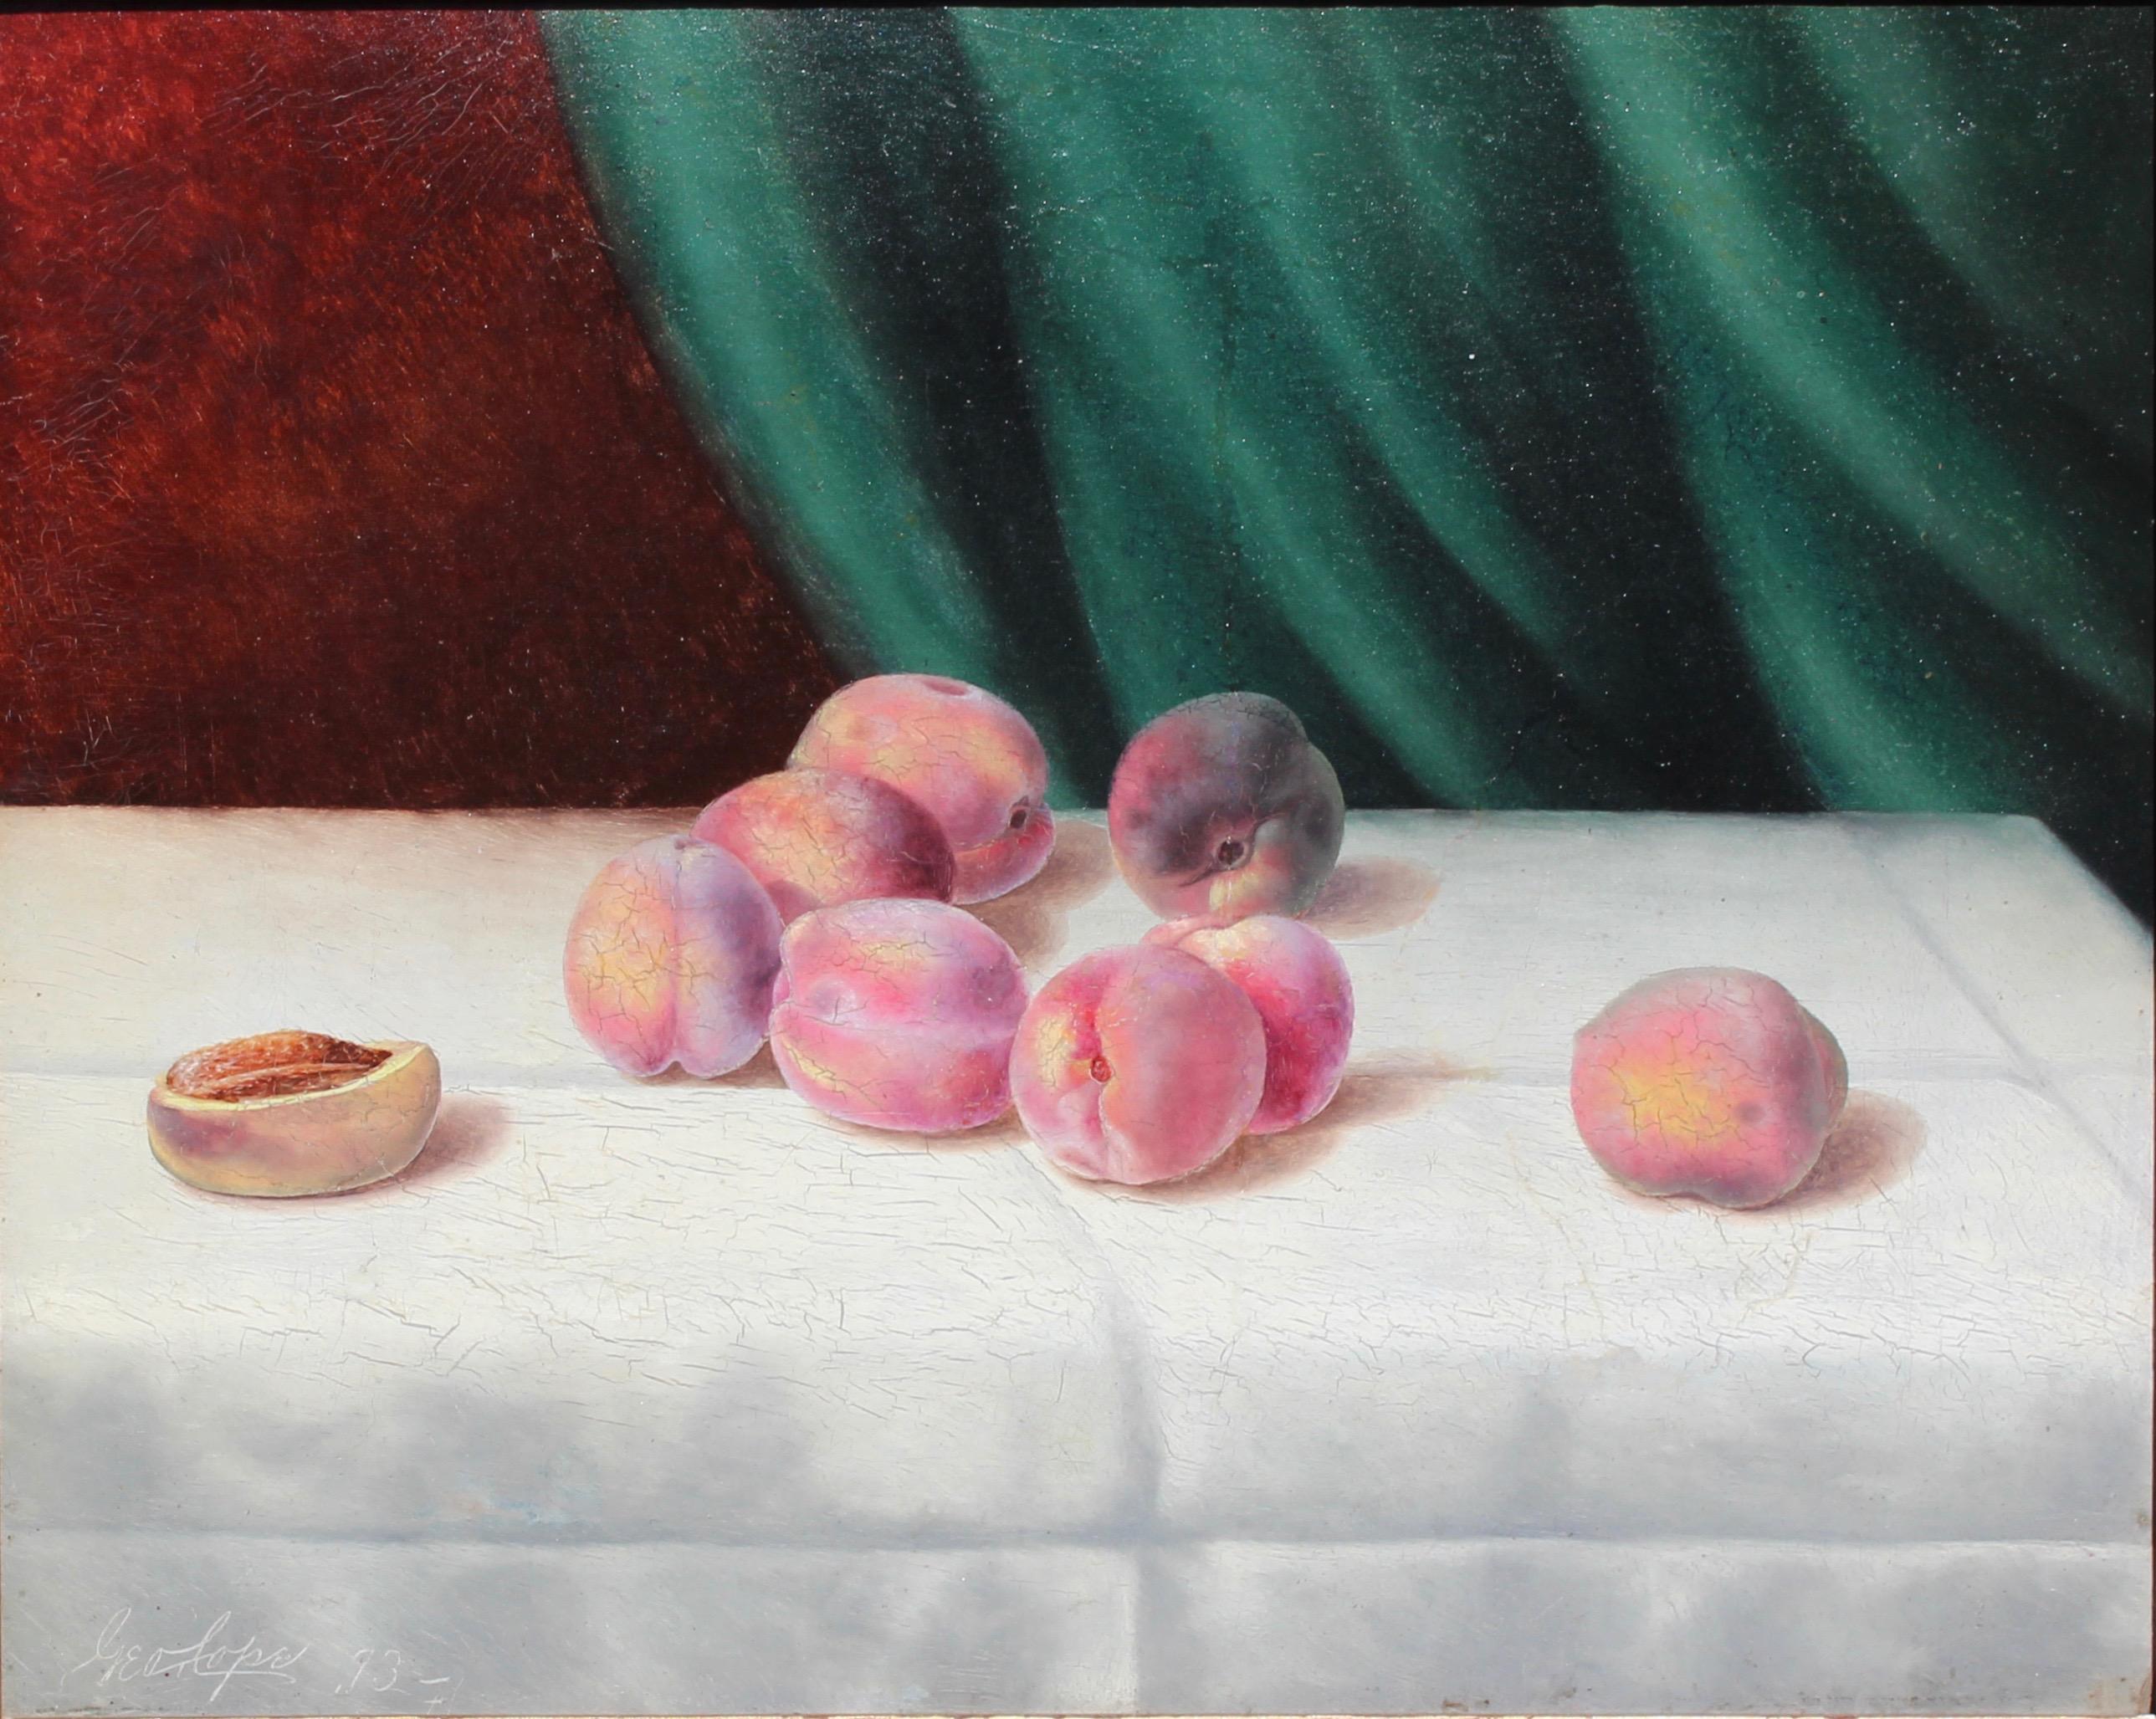 Wondeful still life scene of peaches spread across a table by West Chester artist George Cope.